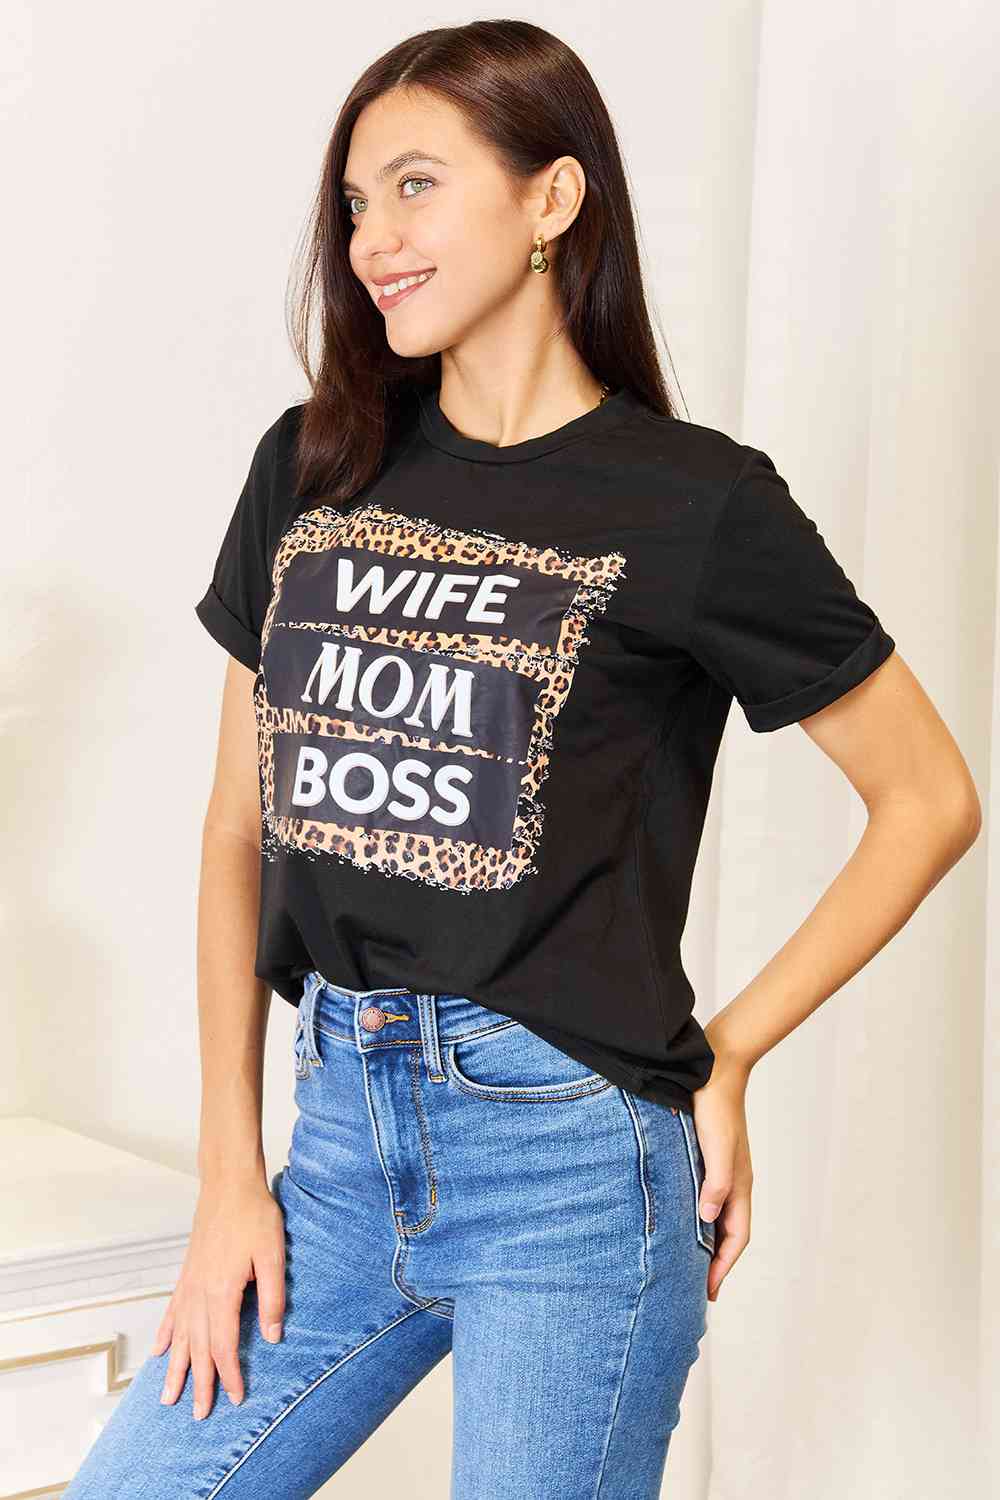 Simply Love WIFE MOM BOSS Leopard Graphic T-Shirt - Mythical Kitty Boutique